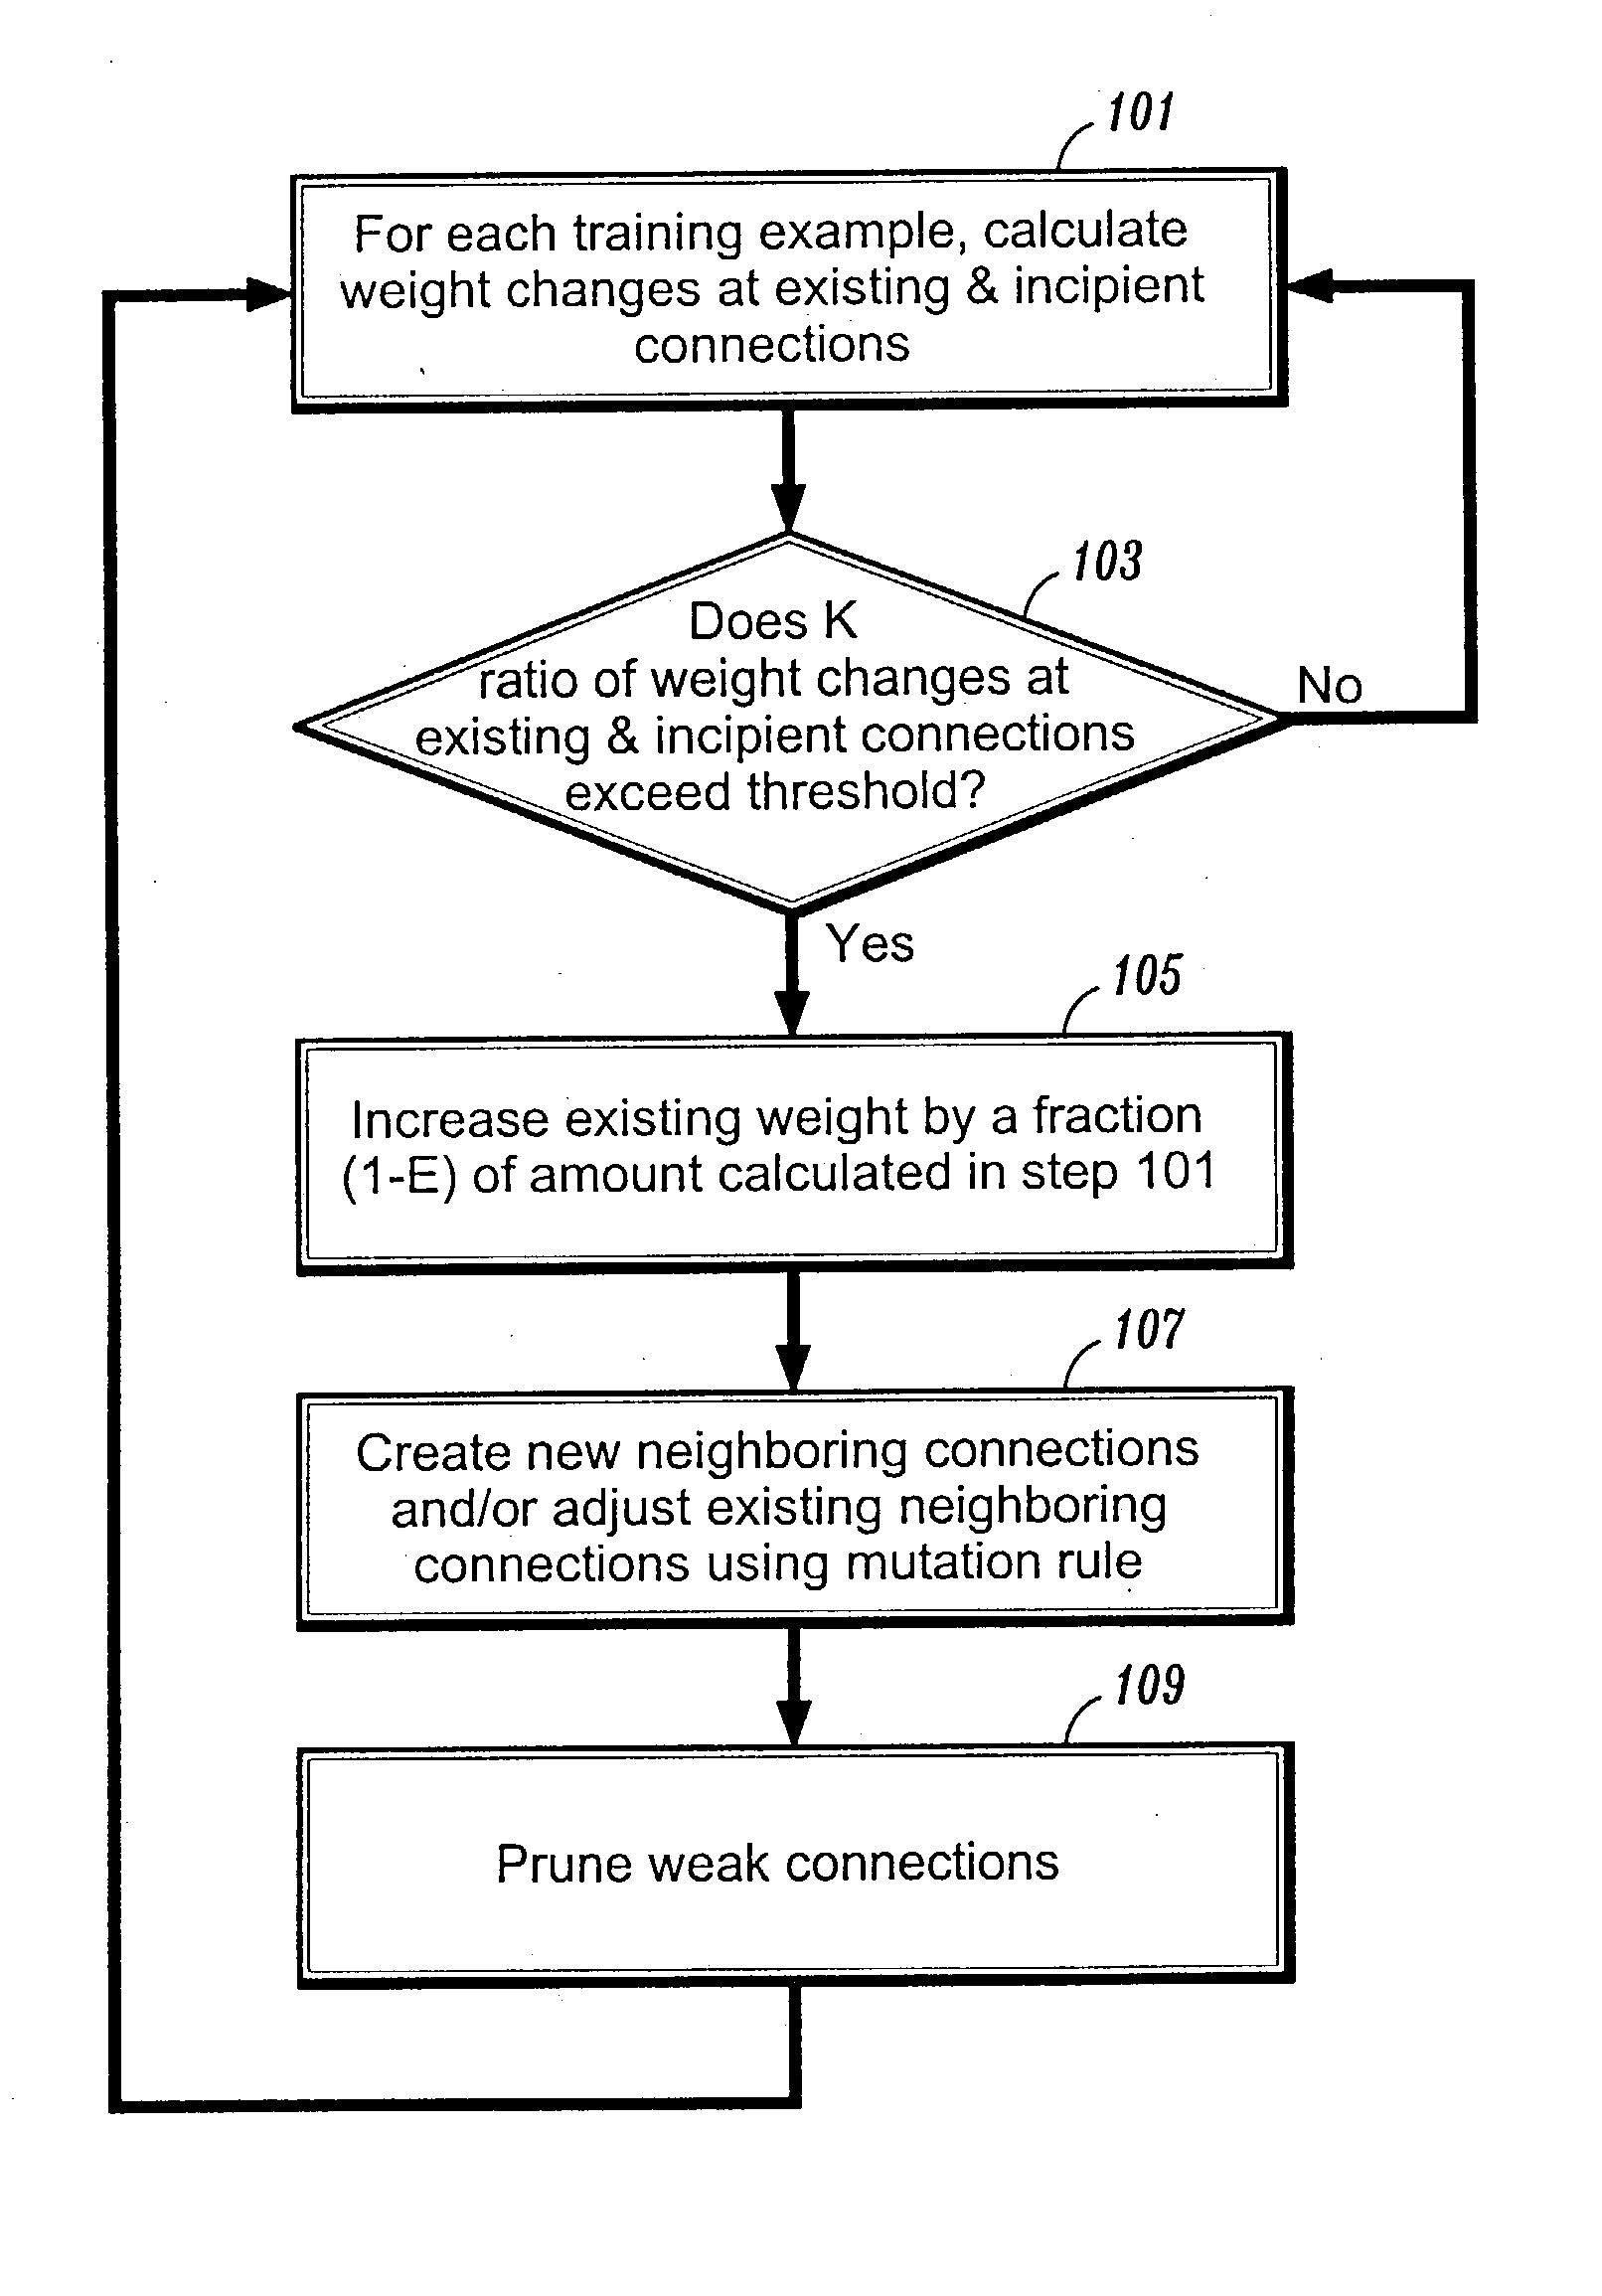 Neural network device for evolving appropriate connections